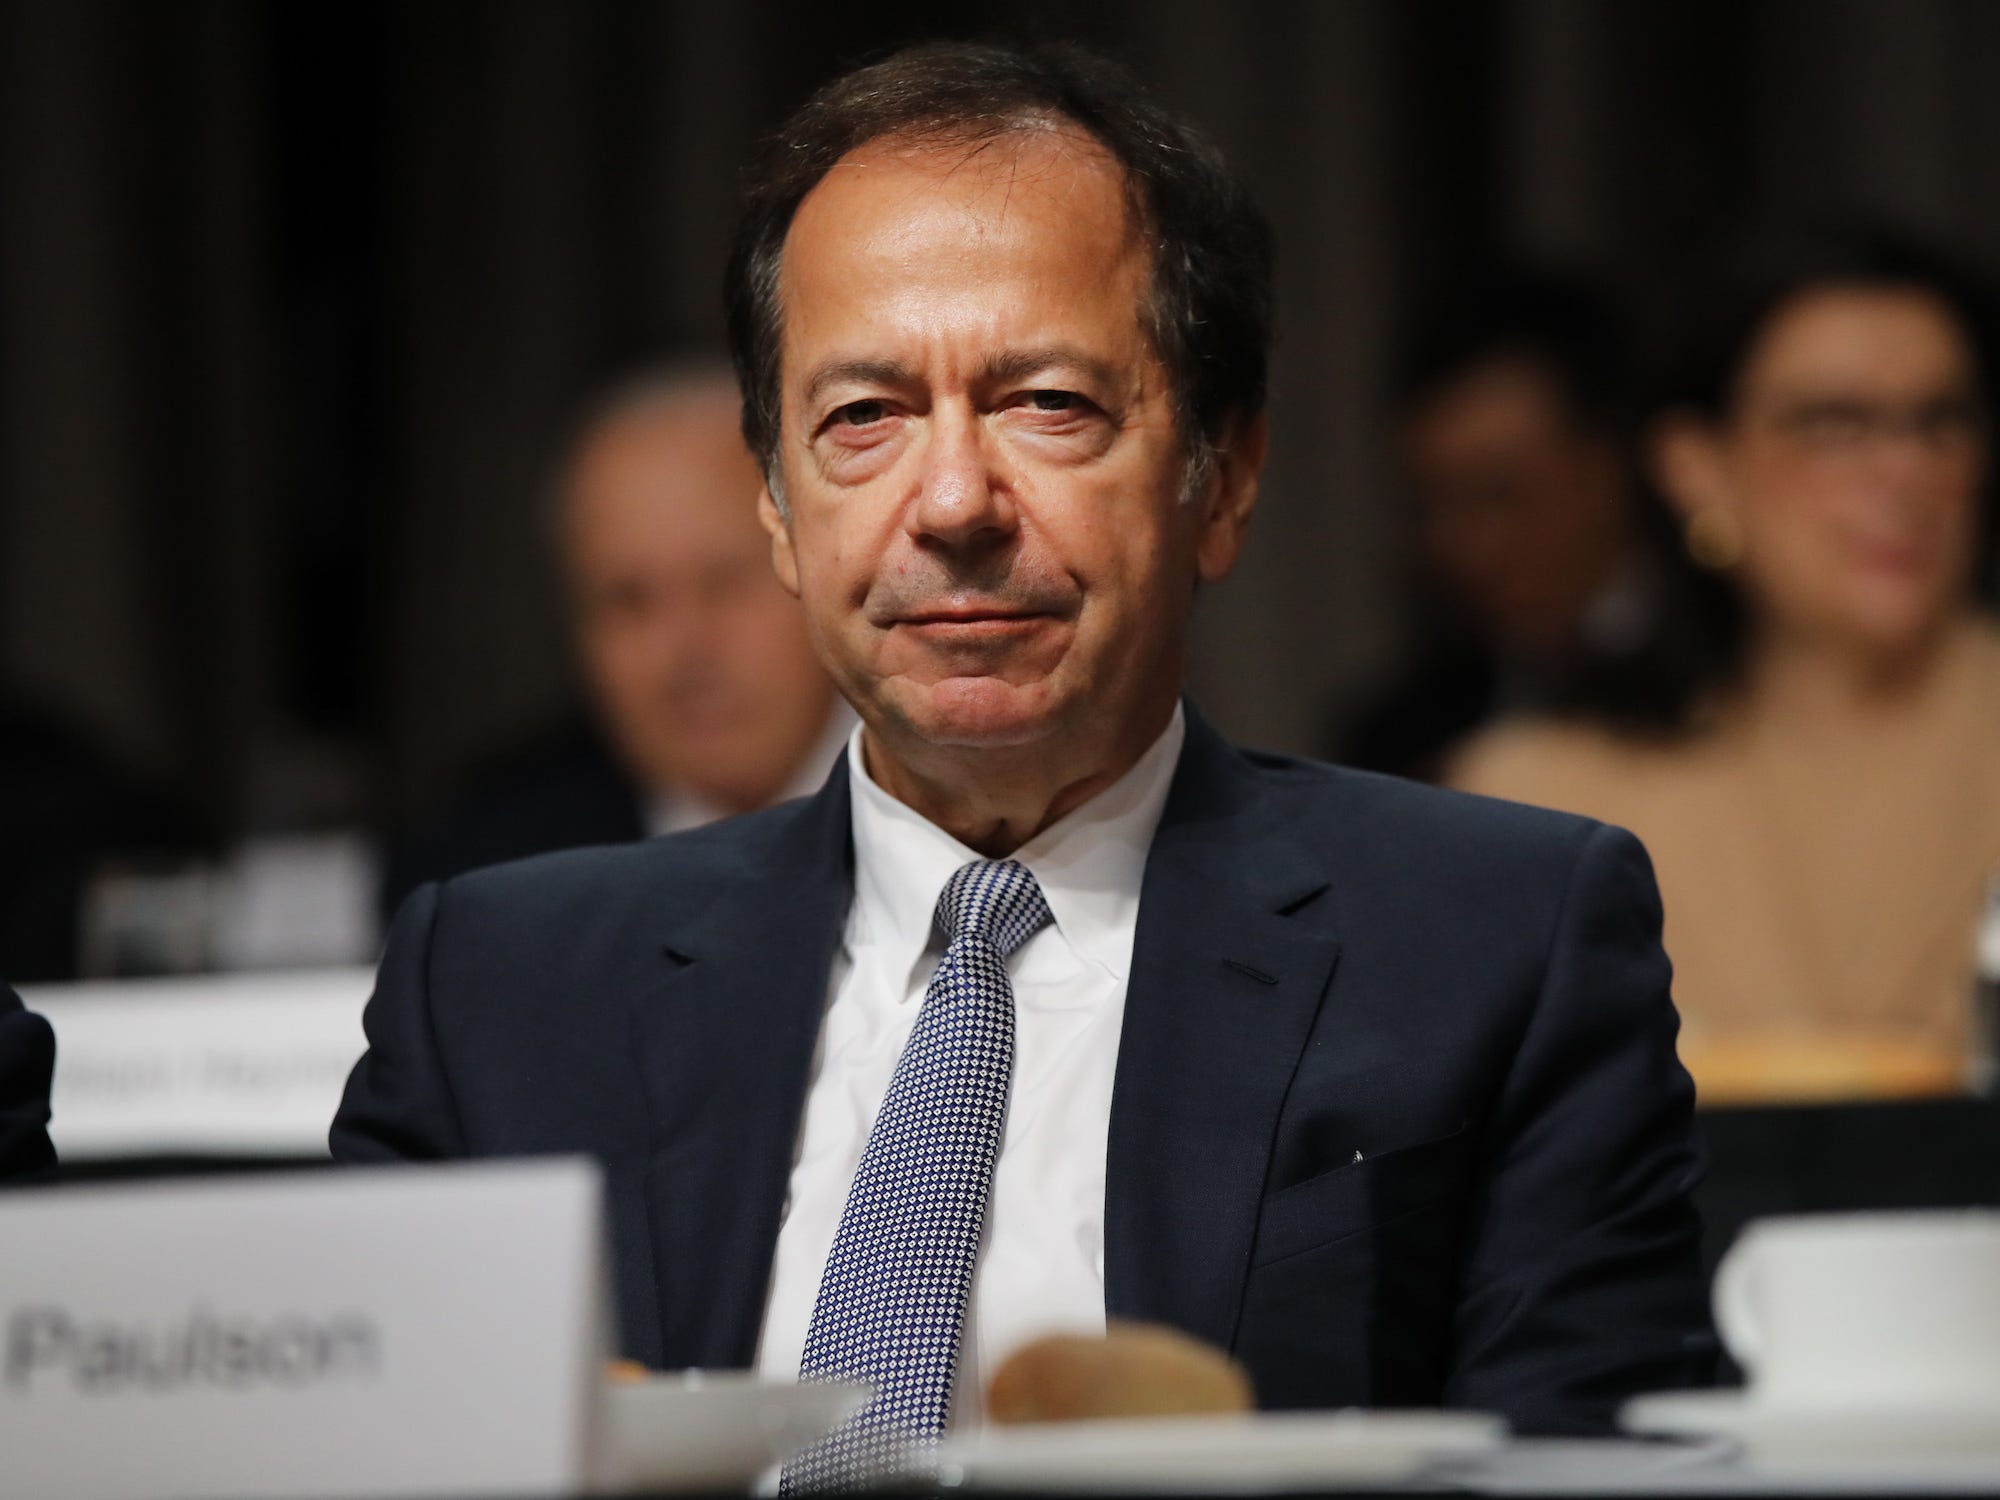 Hedge fund manager John Paulson attending a Trump speech in New York in 2019.